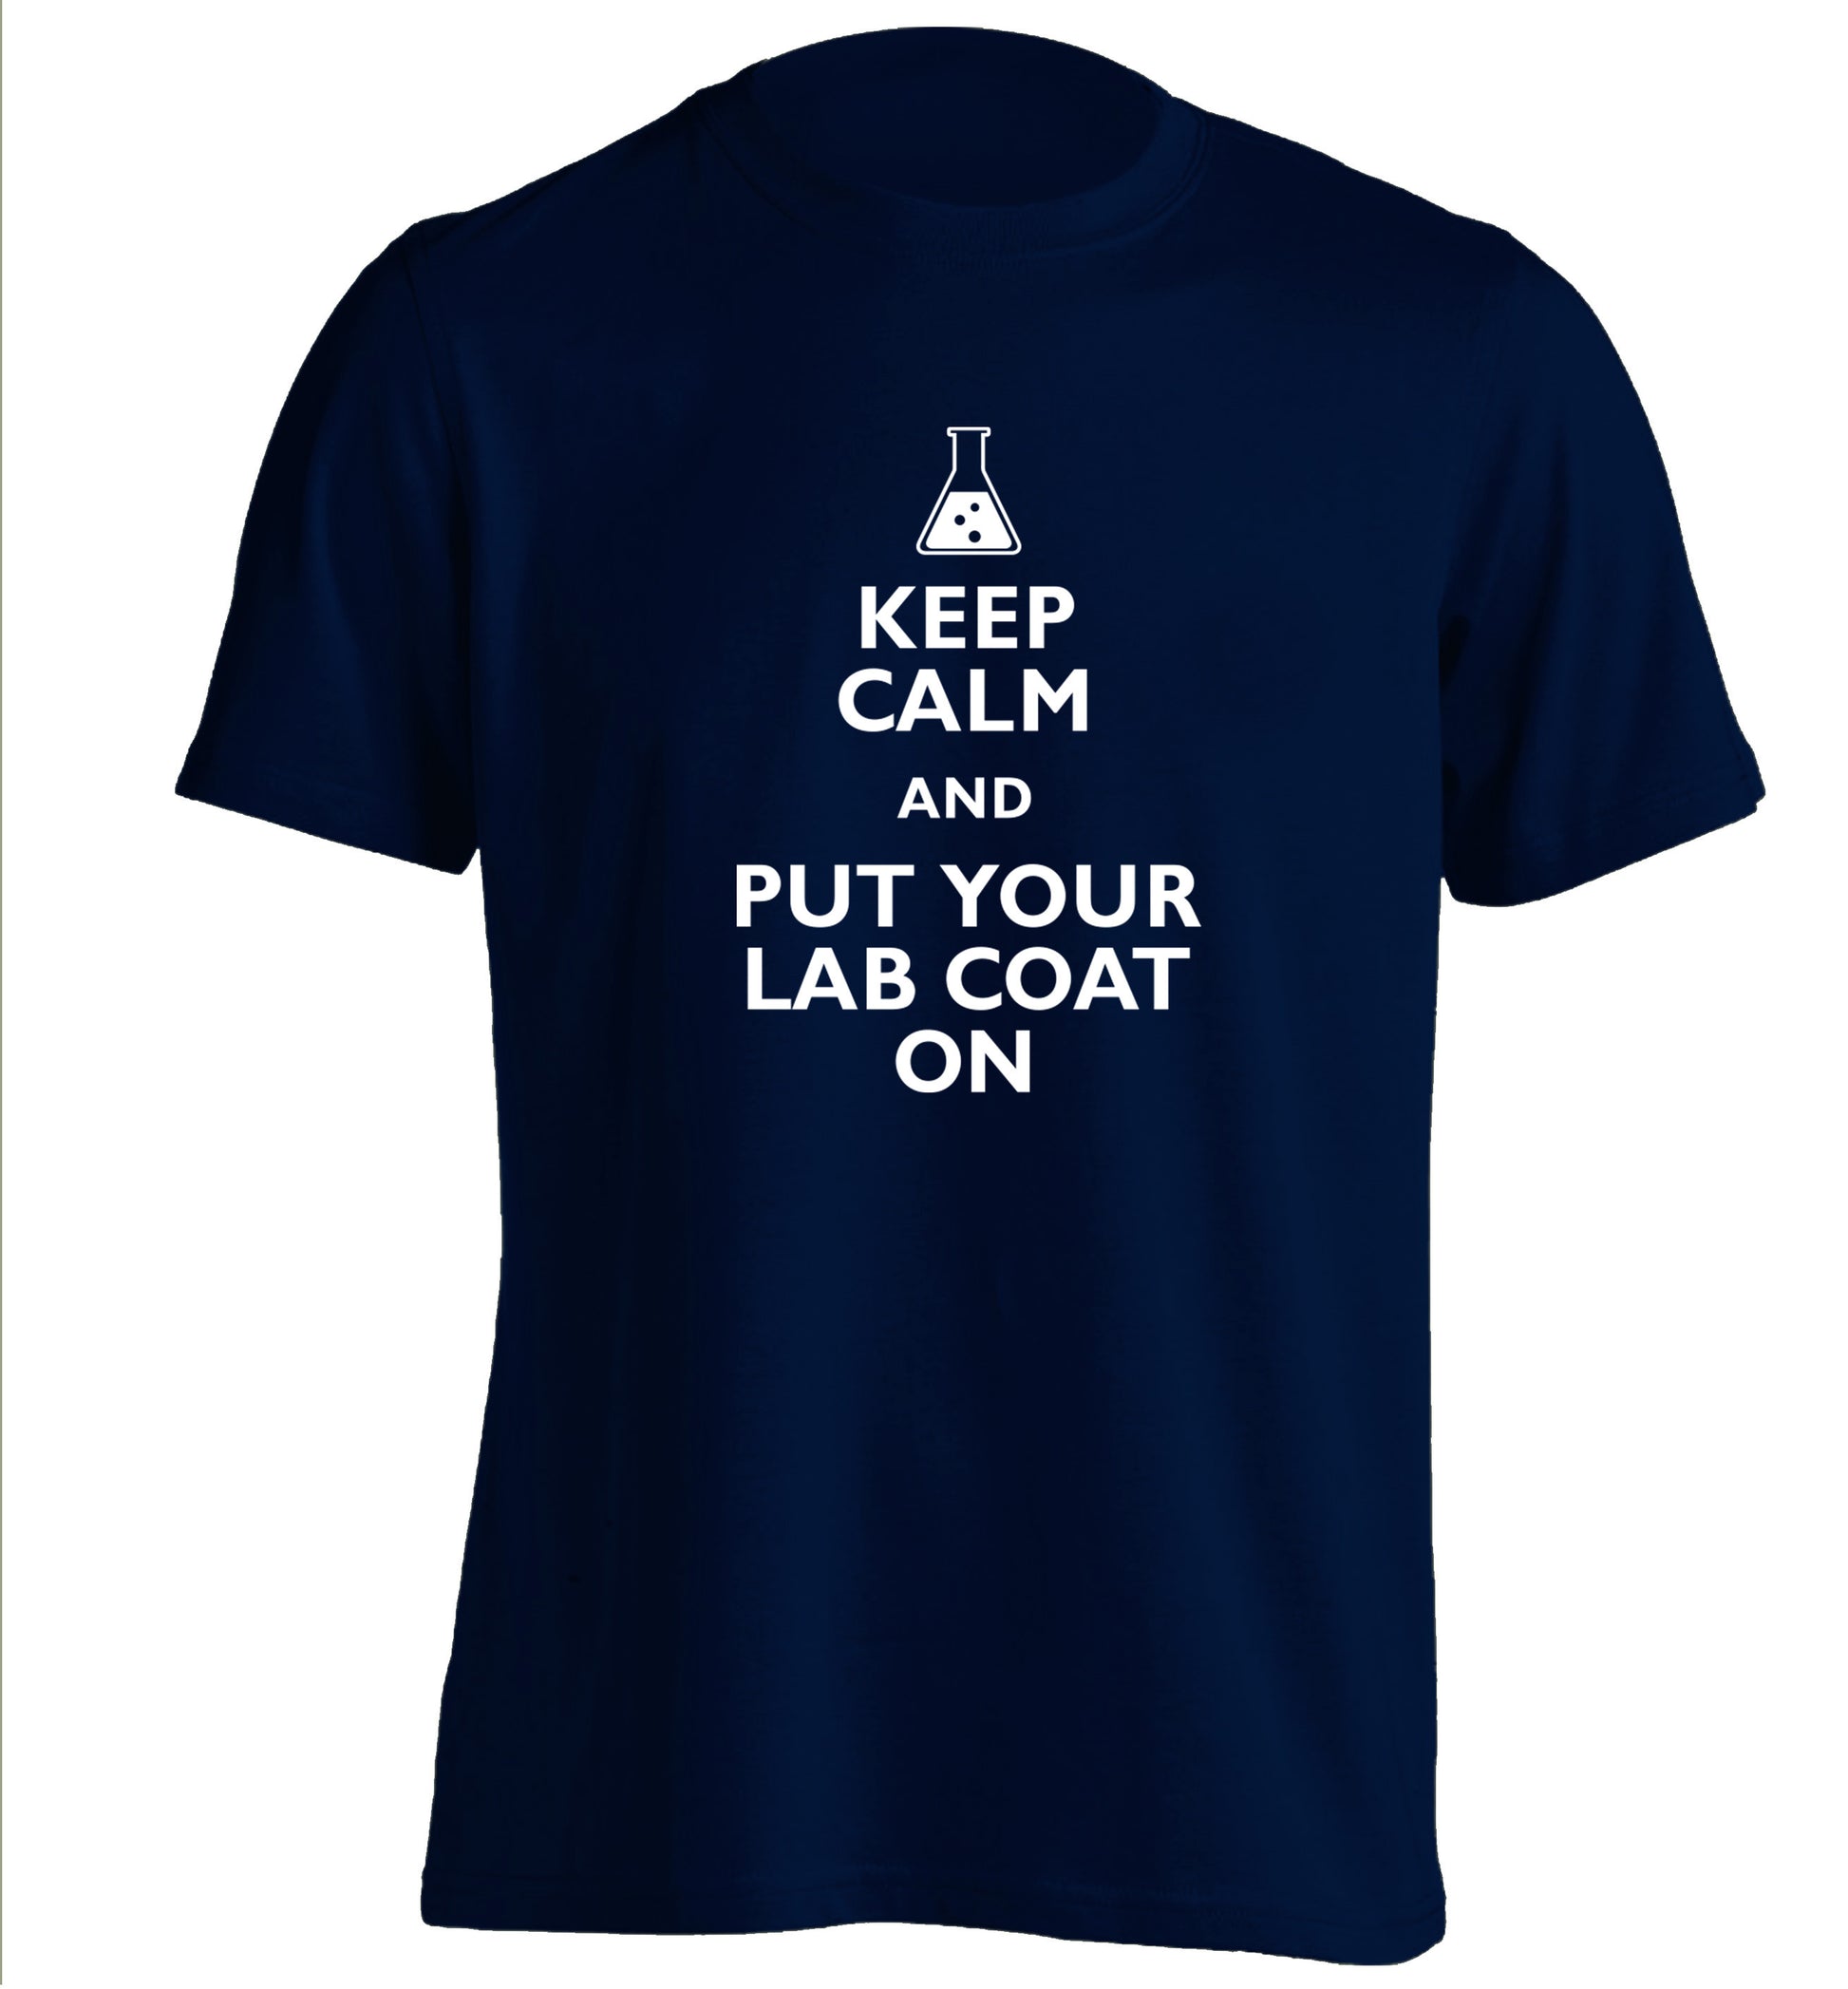 Keep calm and put your lab coat on adults unisex navy Tshirt 2XL